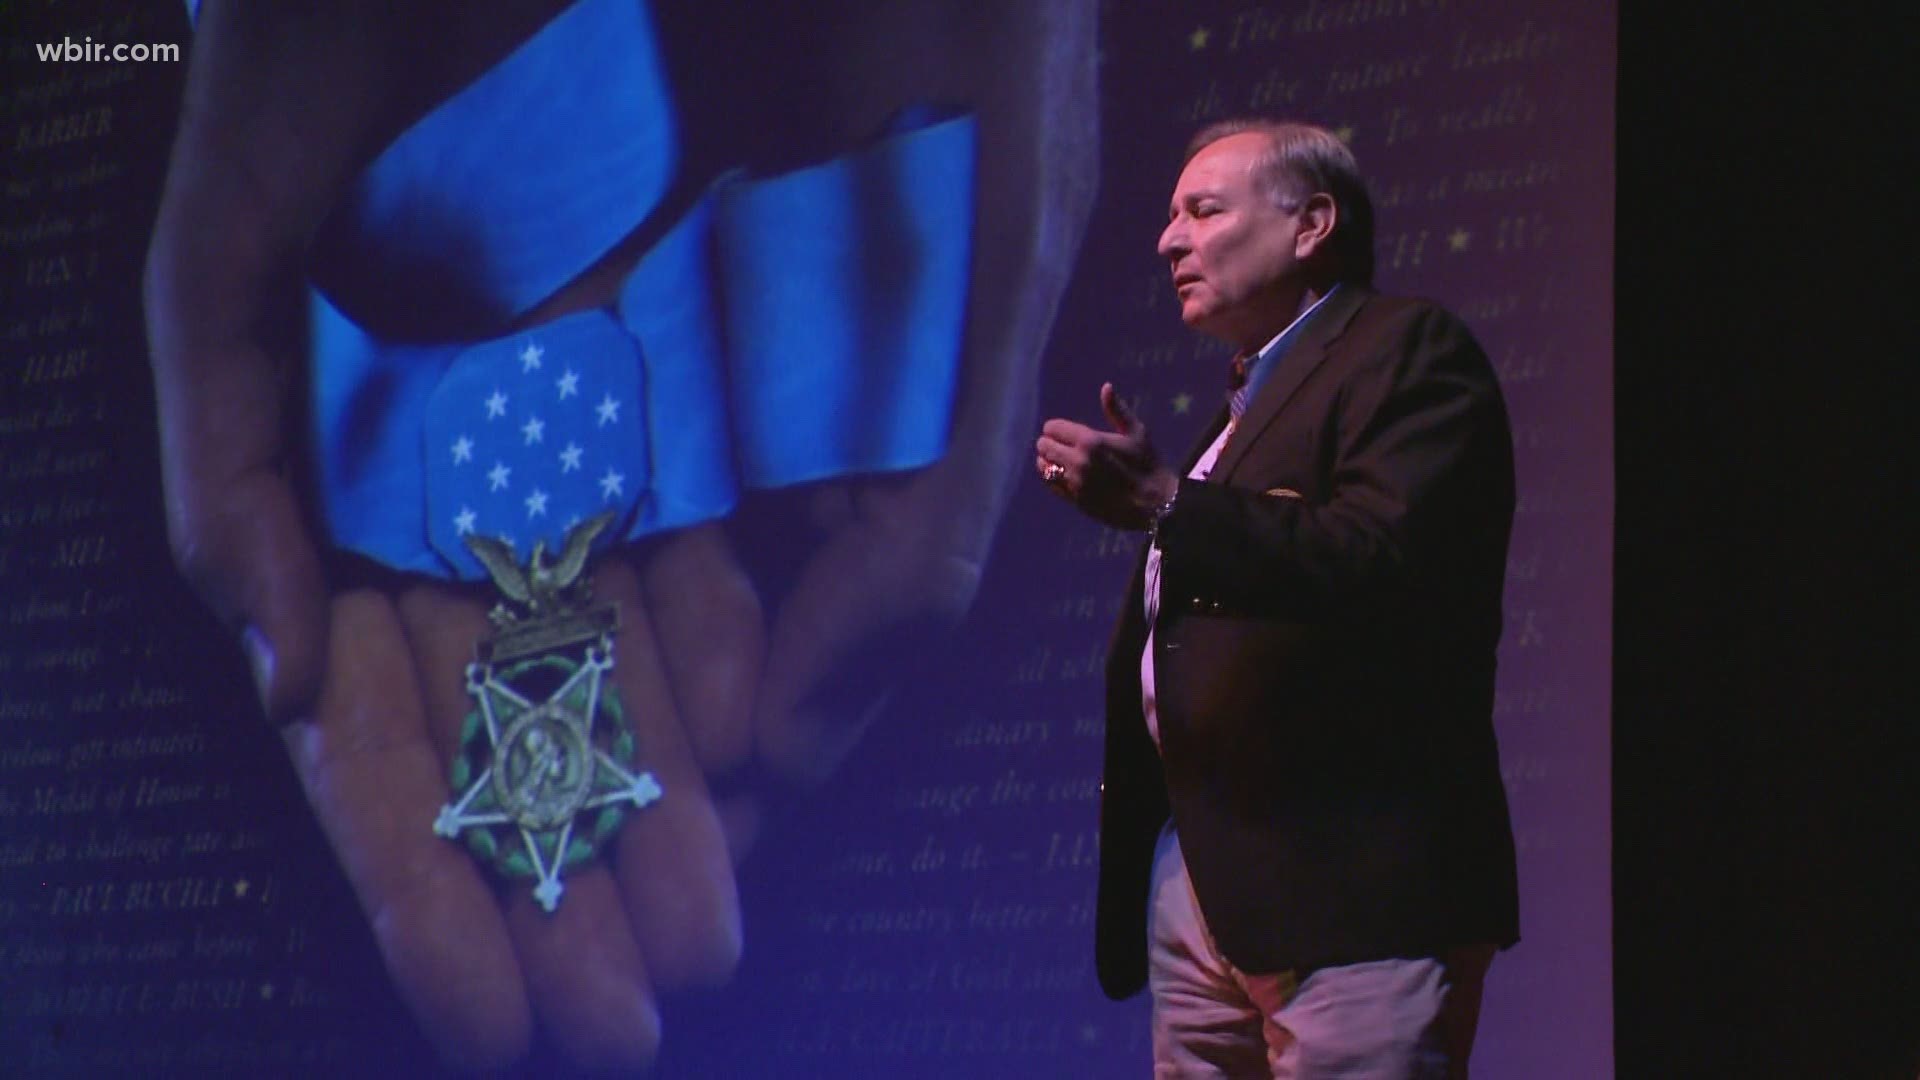 Our most celebrated military heroes were honored at the Medal of Honor Convention in Knoxville in 2014. The group plans to return to the city in 2022.